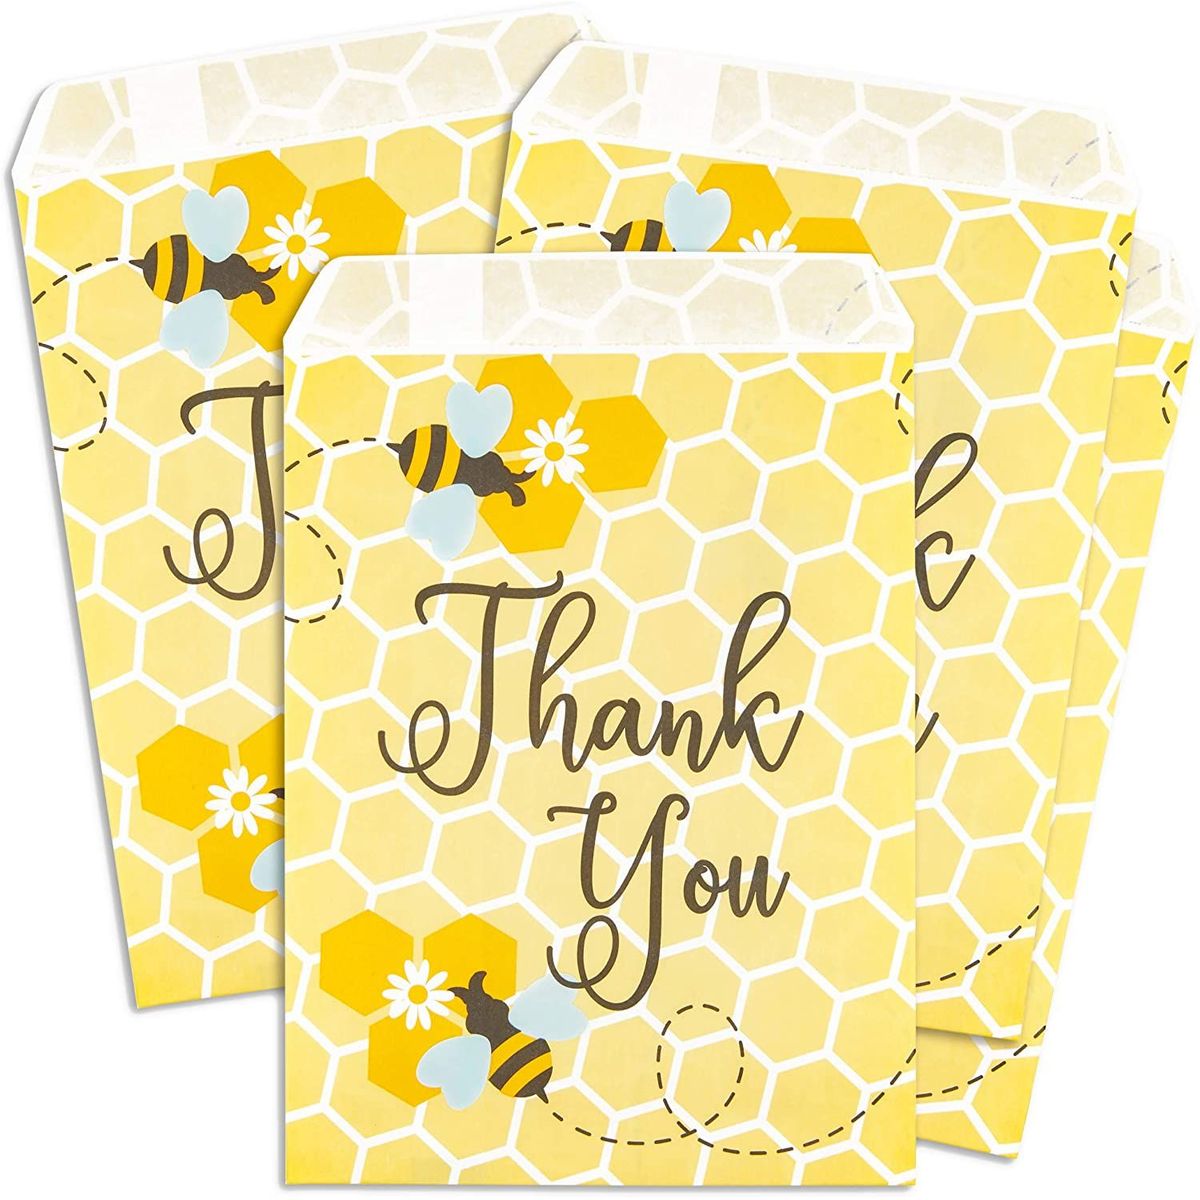 Bee Themed Party Favors for Kids, Honey Gift, Goodie Bags with